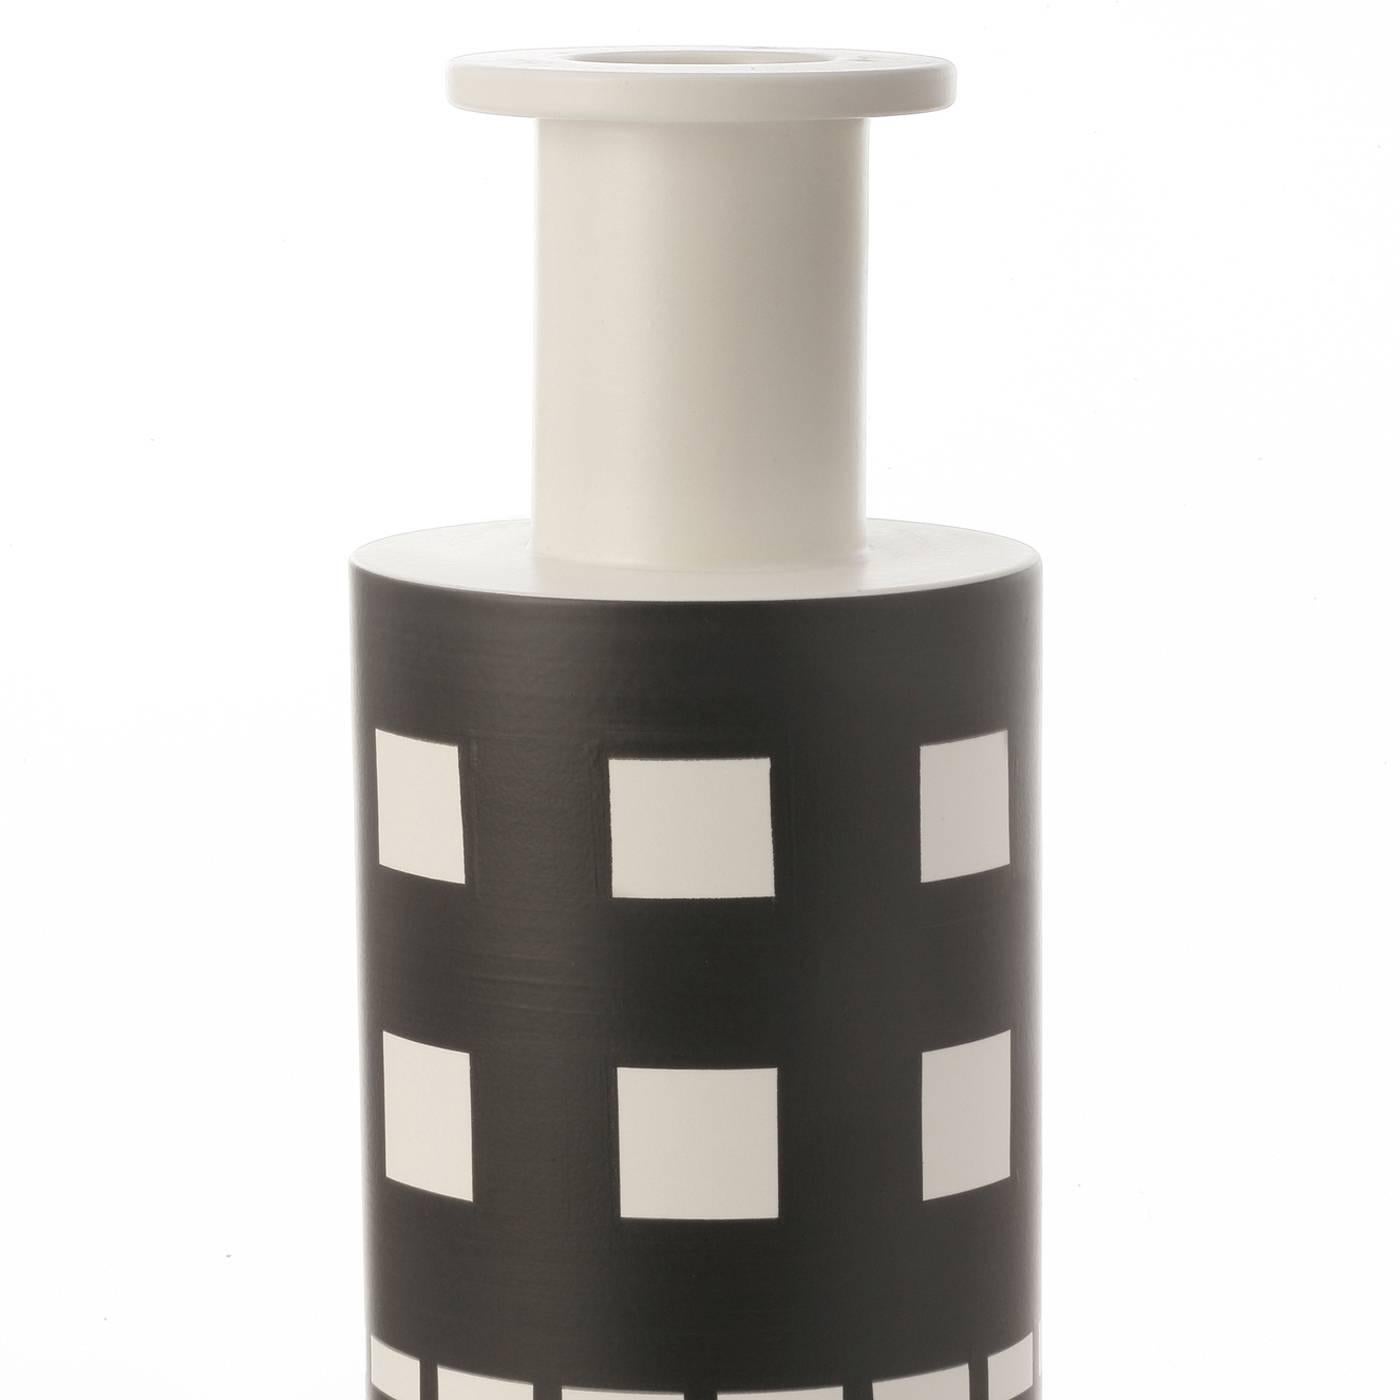 This vase's simple shape is complemented by its geometric decoration that features striking motifs in black on the white background of the cylindrical shape. This piece was designed by renowned architect Ettore Sottsass in 1962.